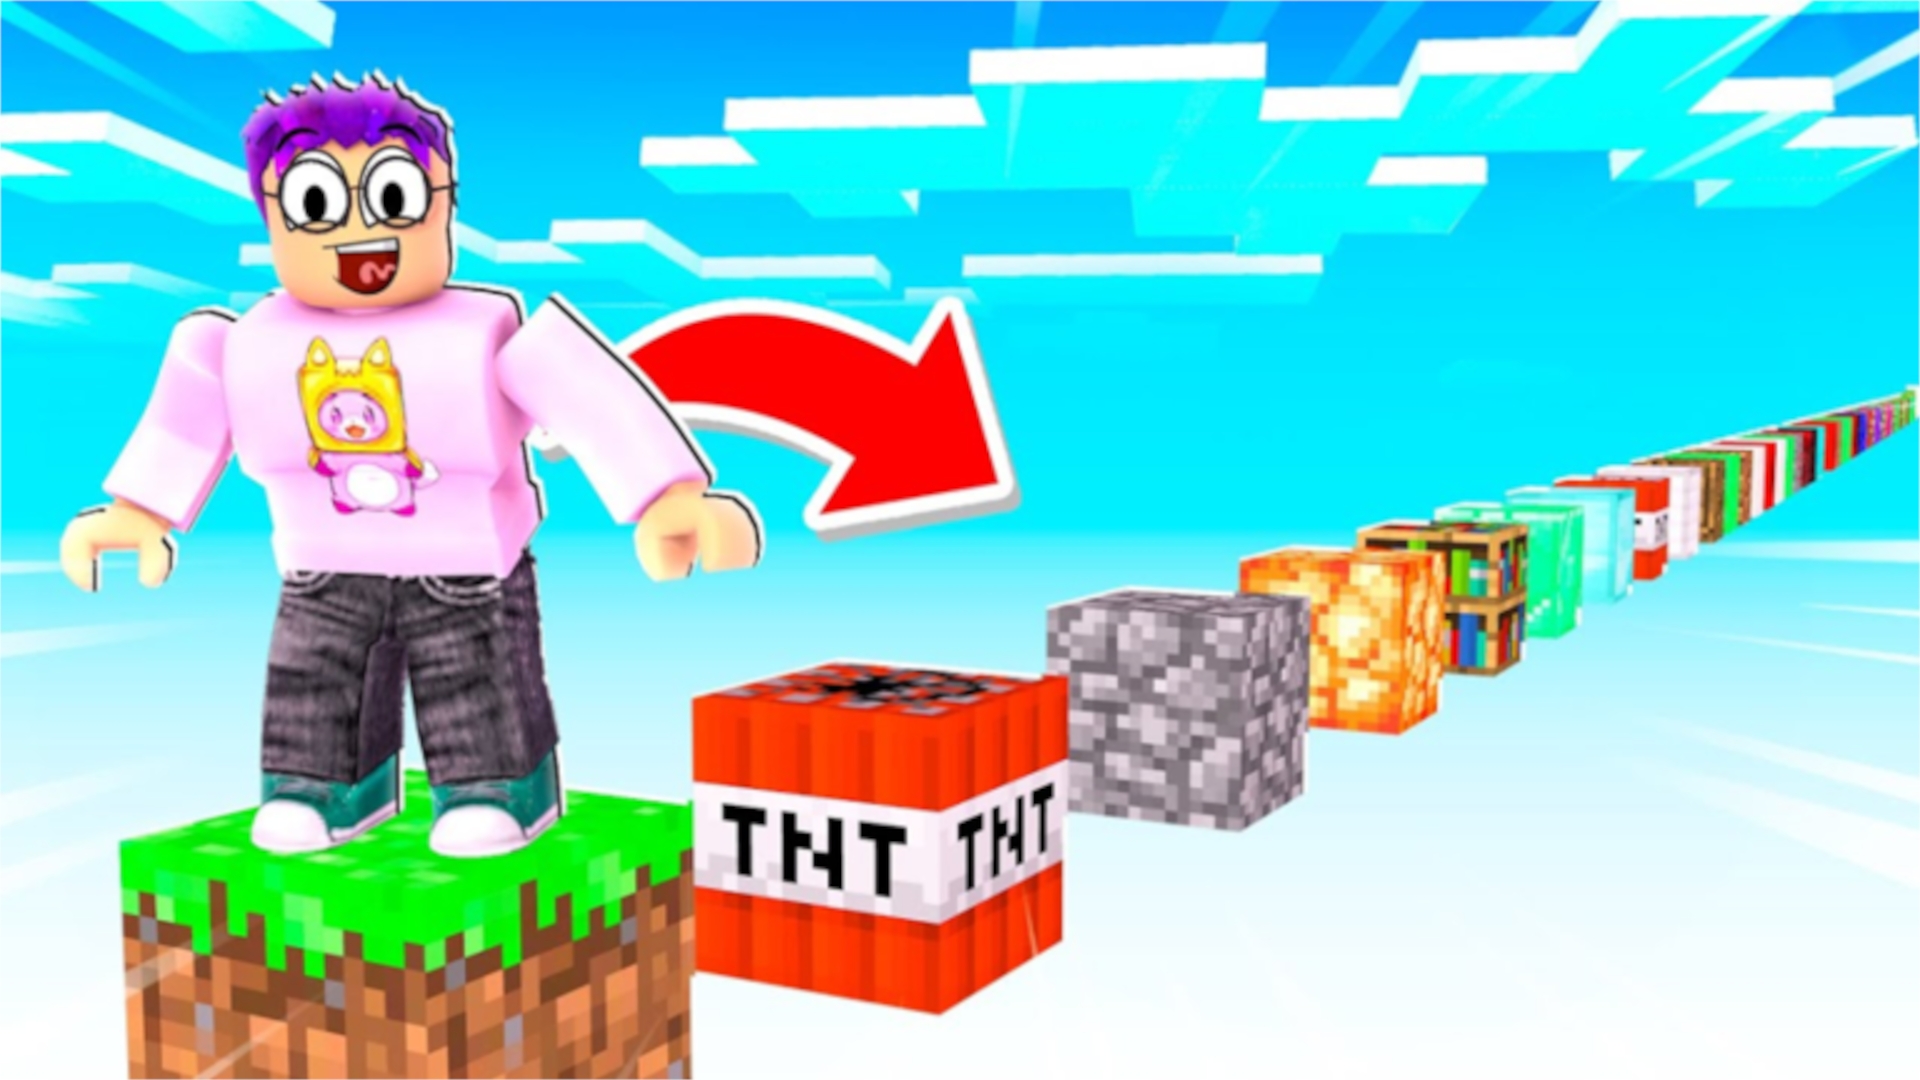 NEW* ALL WORKING CODES FOR BLOCK MINER SIMULATOR 2023! ROBLOX BLOCK MINER  SIMULATOR CODES 